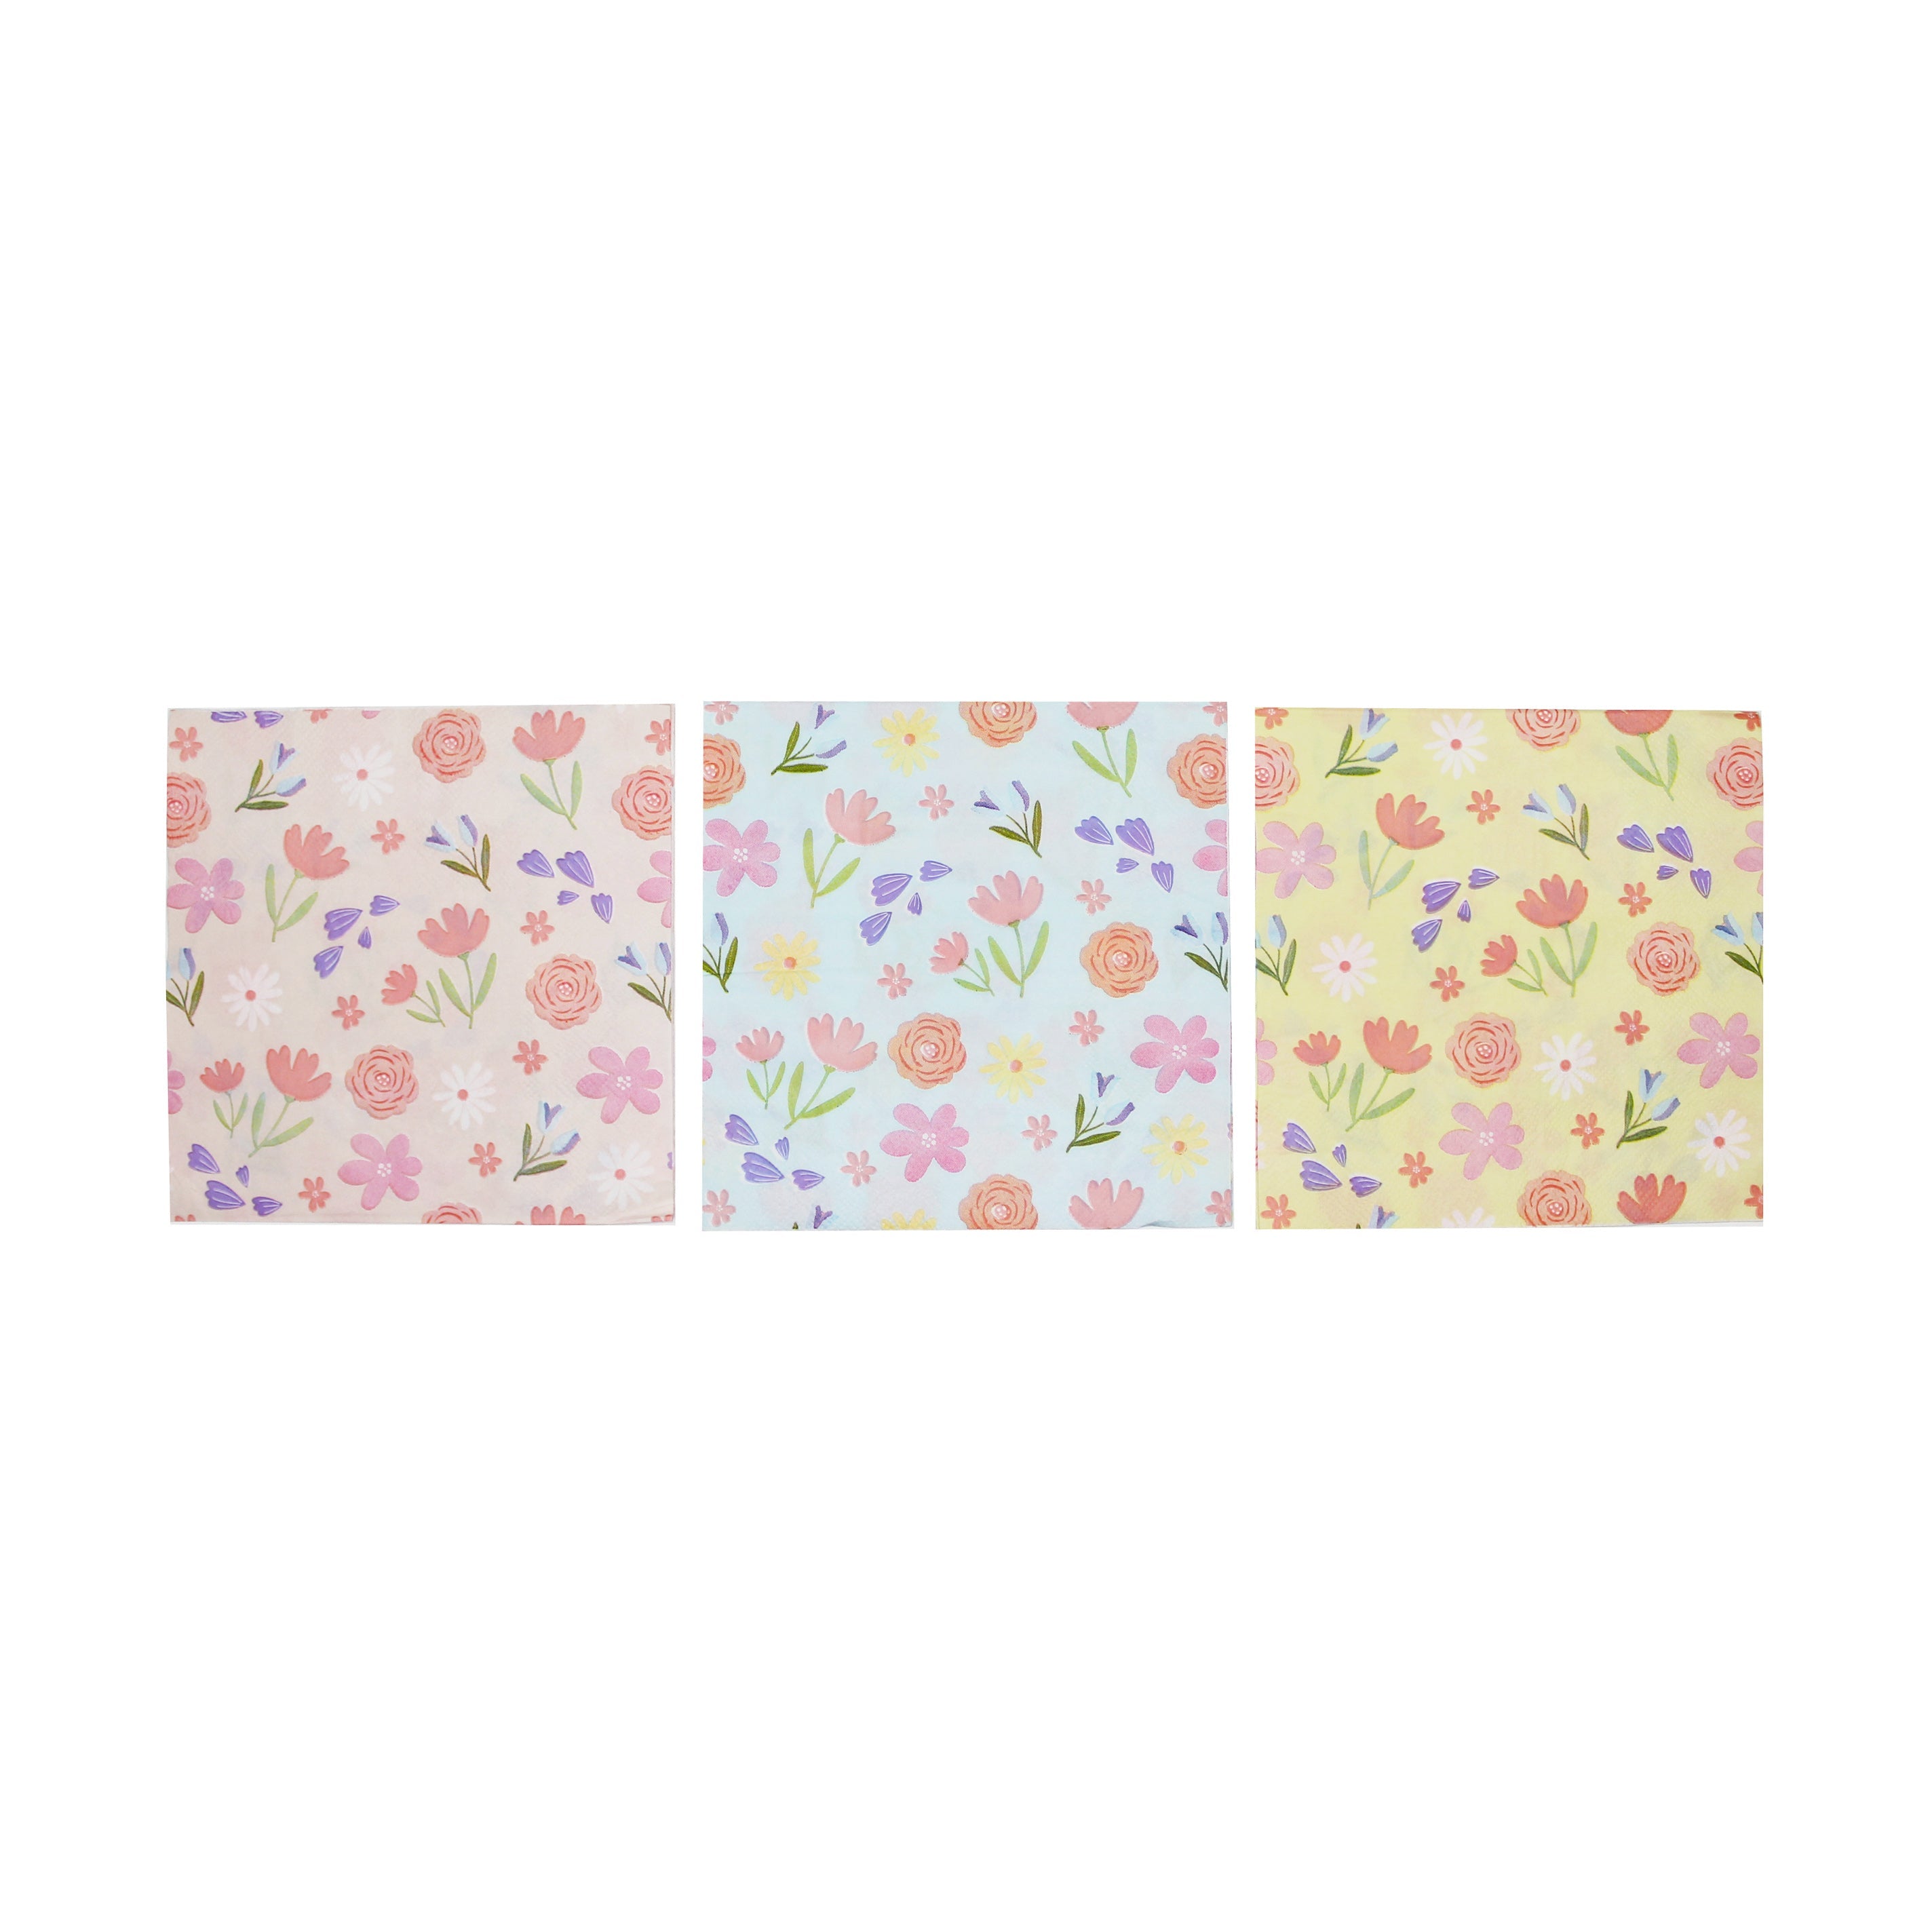 Spring Party Floral Napkins, 24 Ct